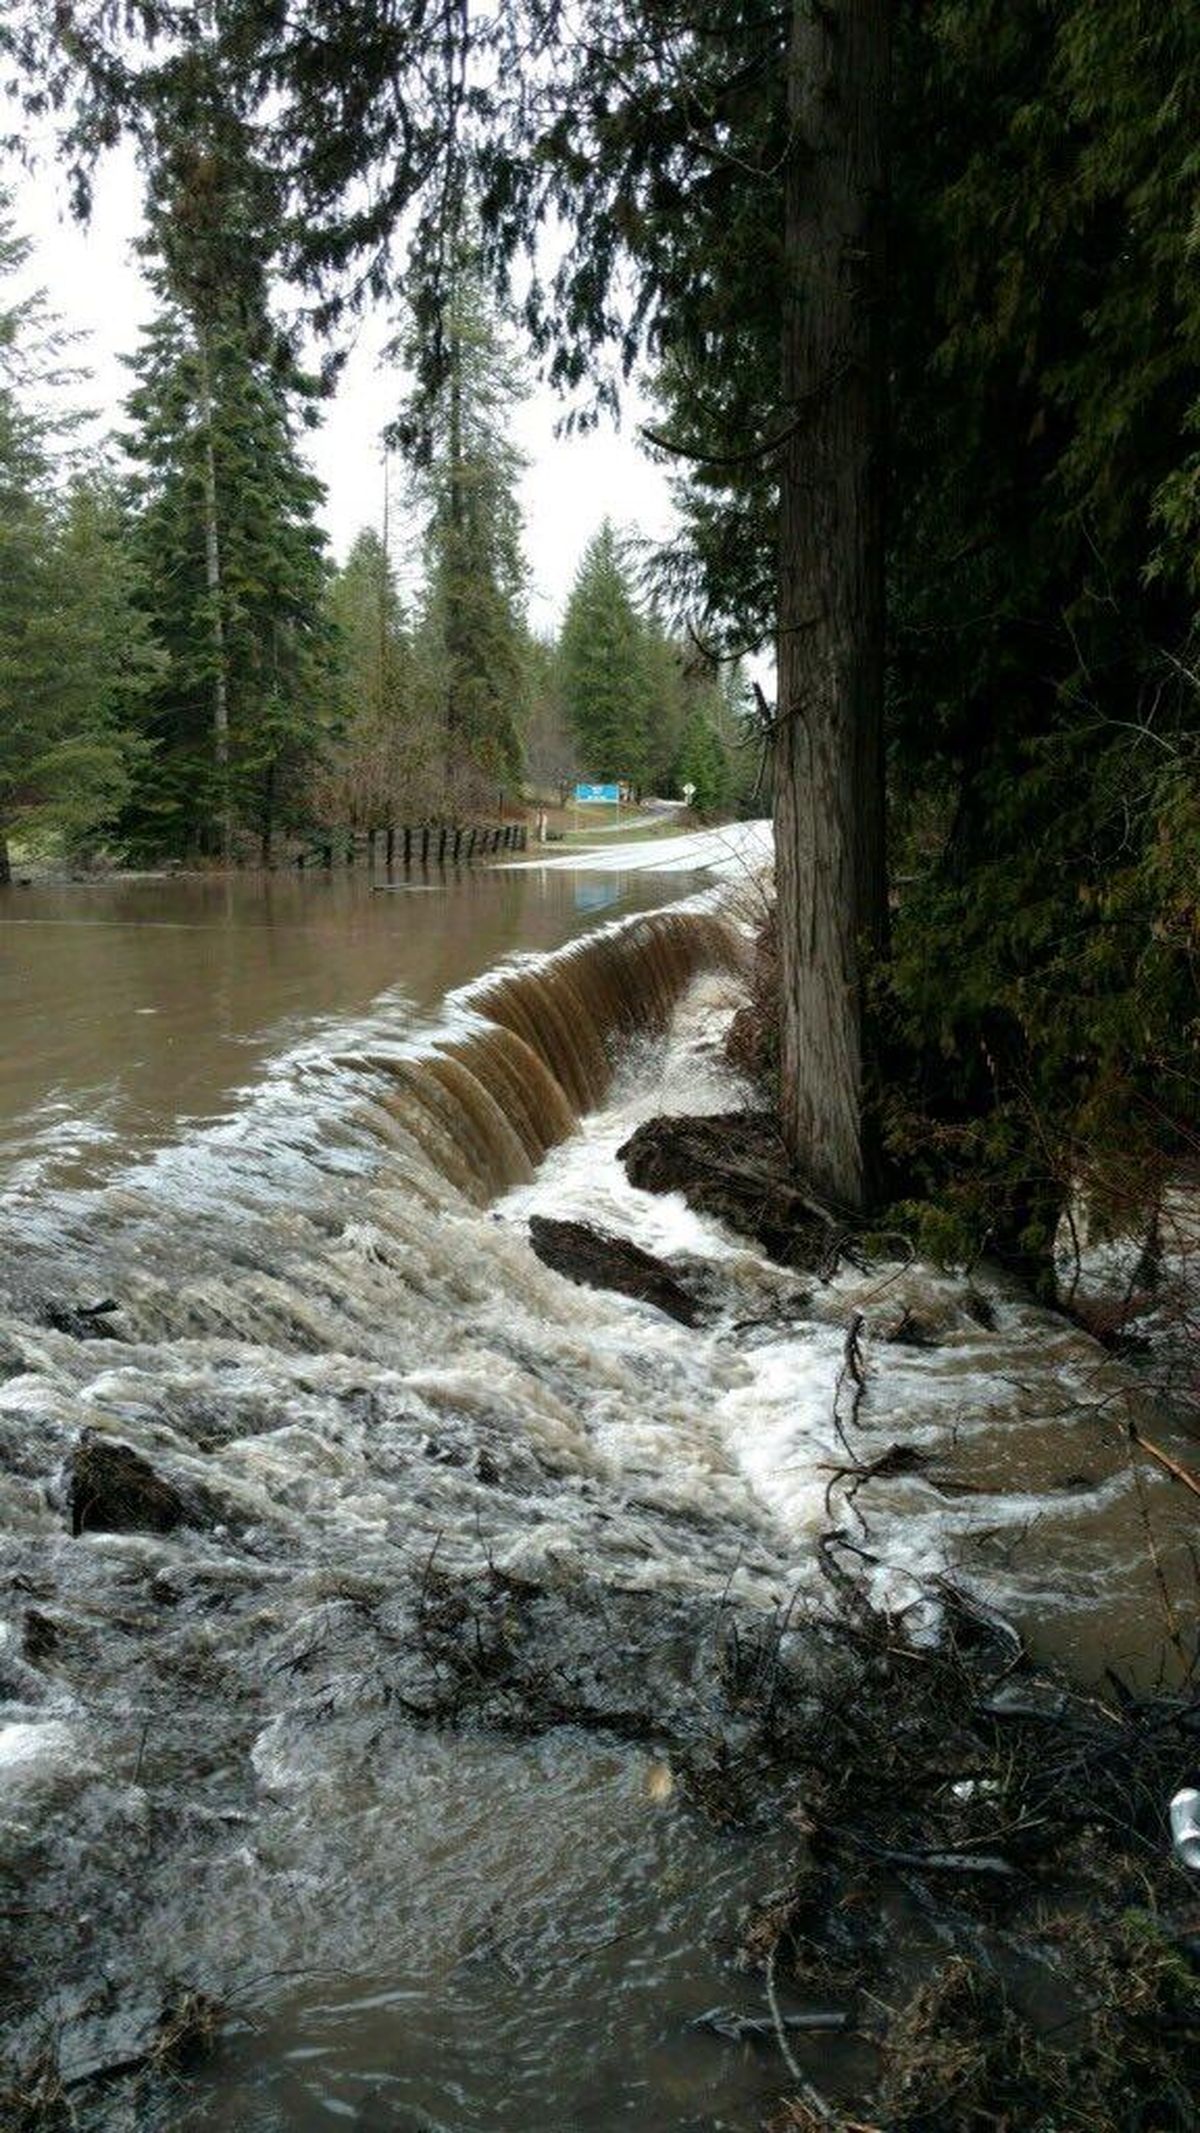 State officials closed a highway in Pend Oreille County because of water runoff that submerged the roadway Monday morning. (Jeff Sevigney / Washington State Patrol)